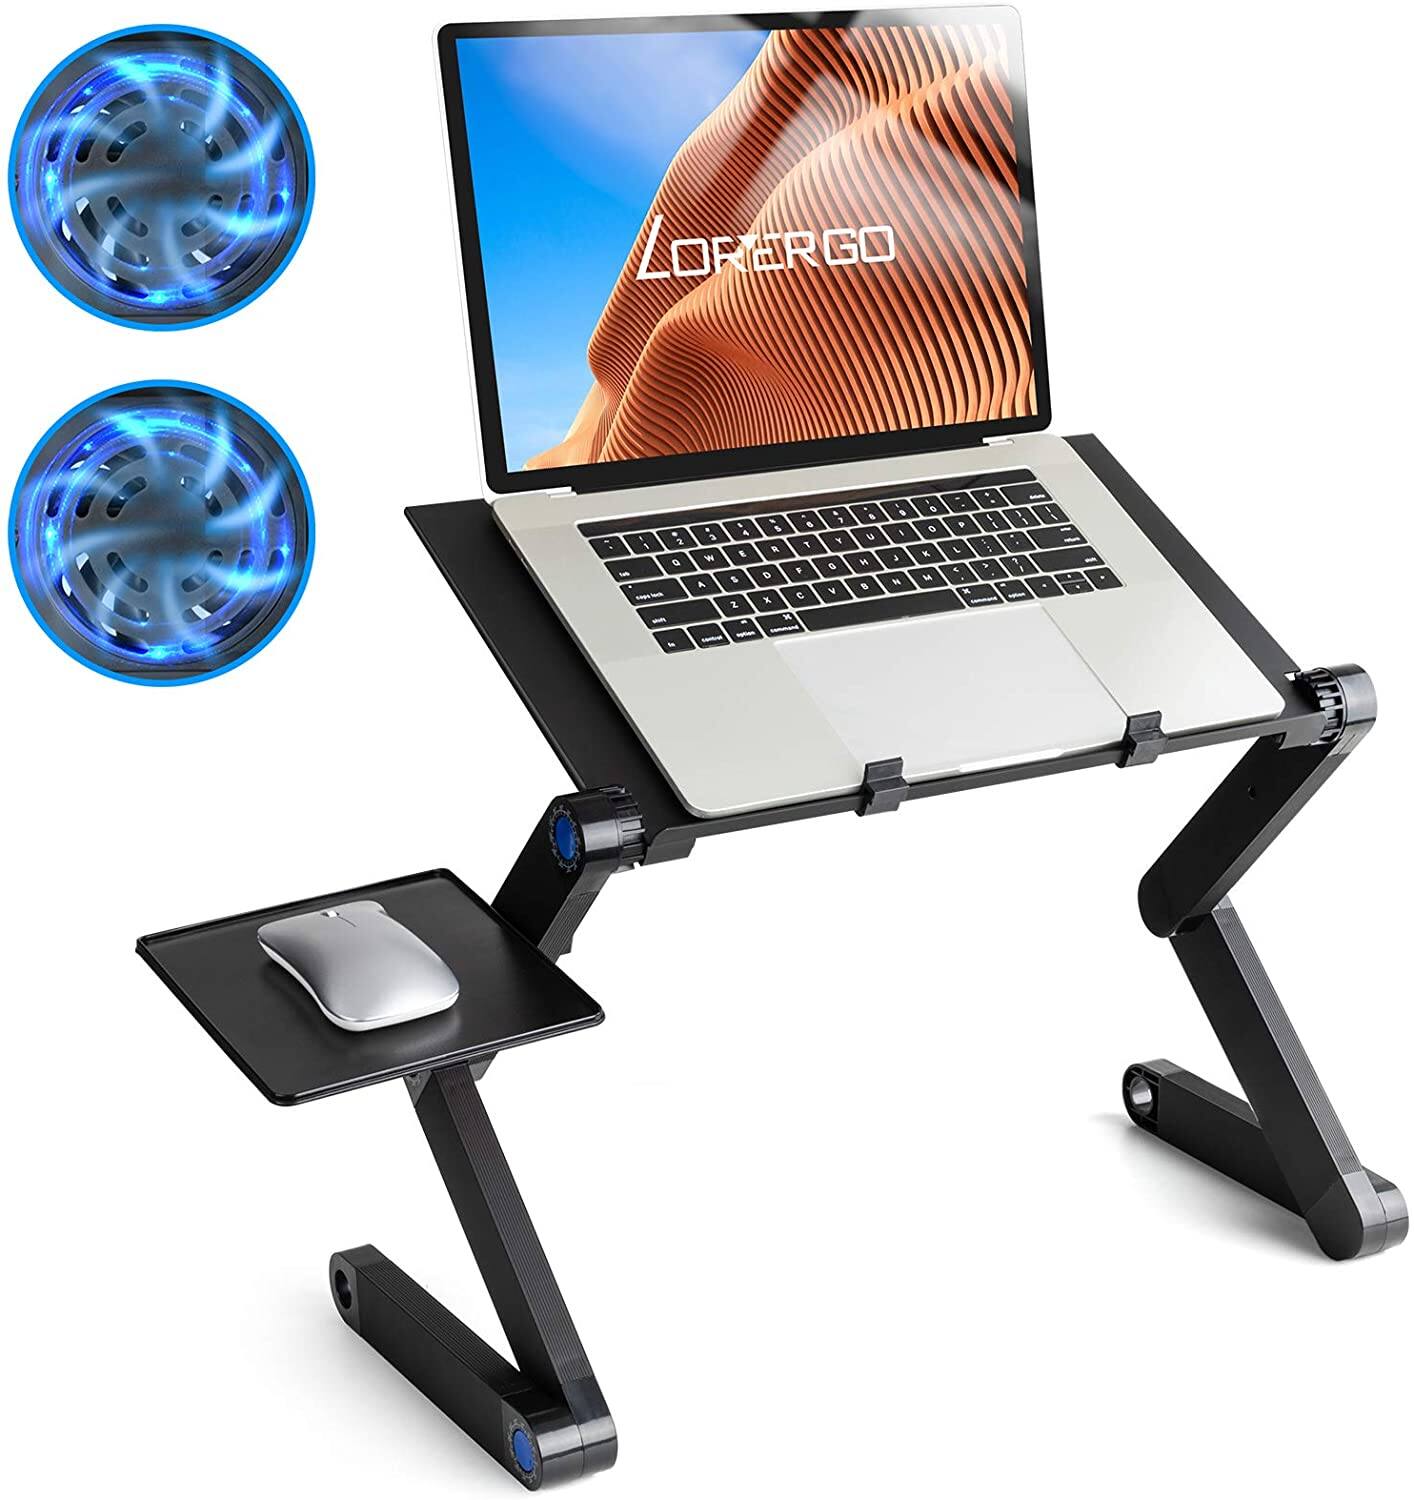 Loryergo Adjustable Laptop Stand w/ 2 CPU Cooling Fans and Mouse Pad for 15.6'' Laptops @ $10.79 + FSSS